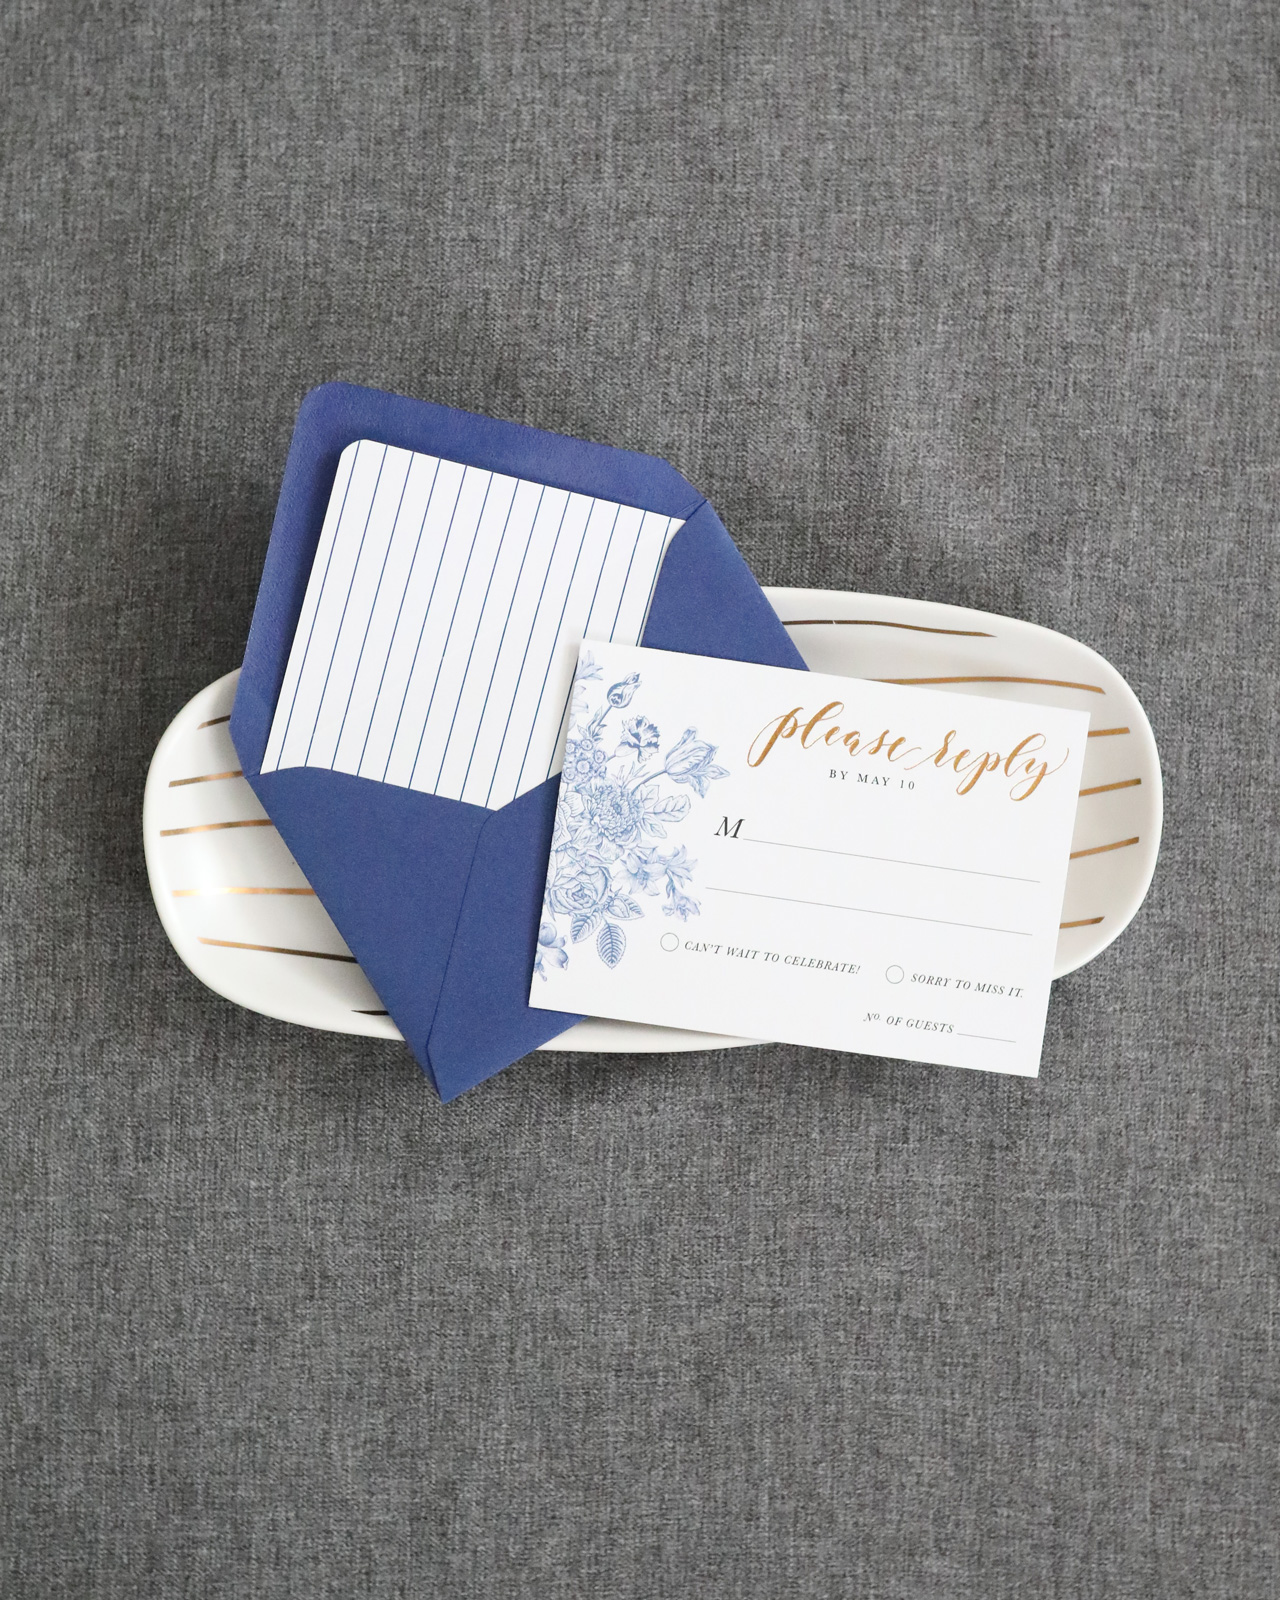 Chinoiserie-Inspired Blue and White Wedding Invitations by Honeybee Paper Co.